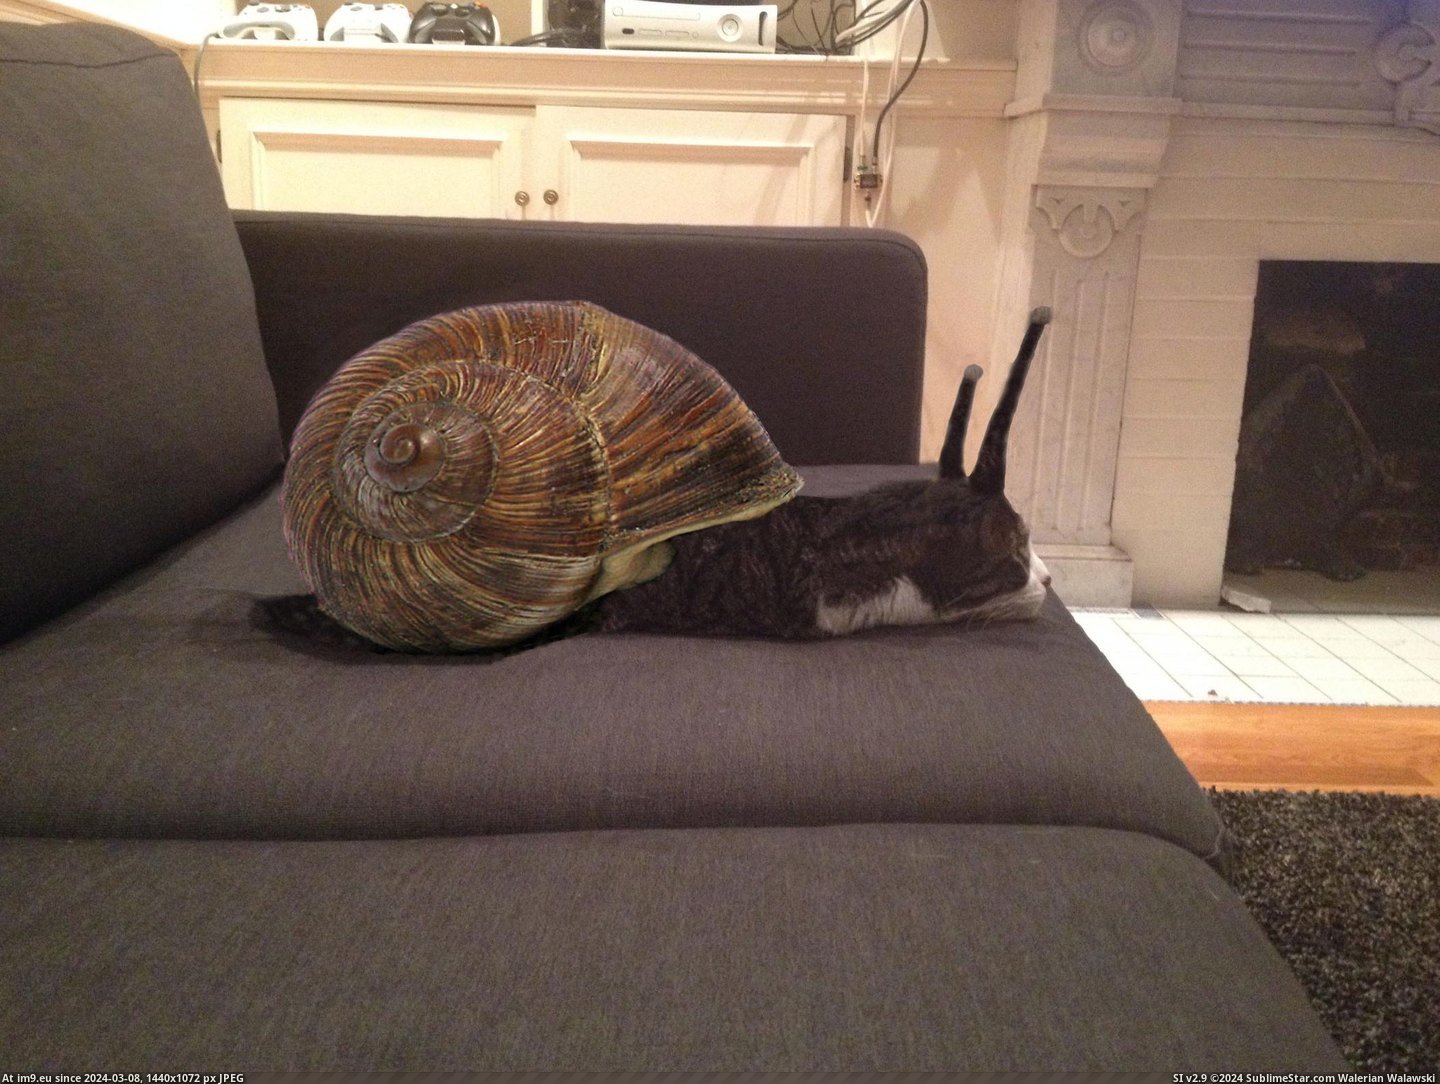 #Cat #Snail #Roommate [Pics] My roommate's cat... is a snail. Pic. (Image of album My r/PICS favs))